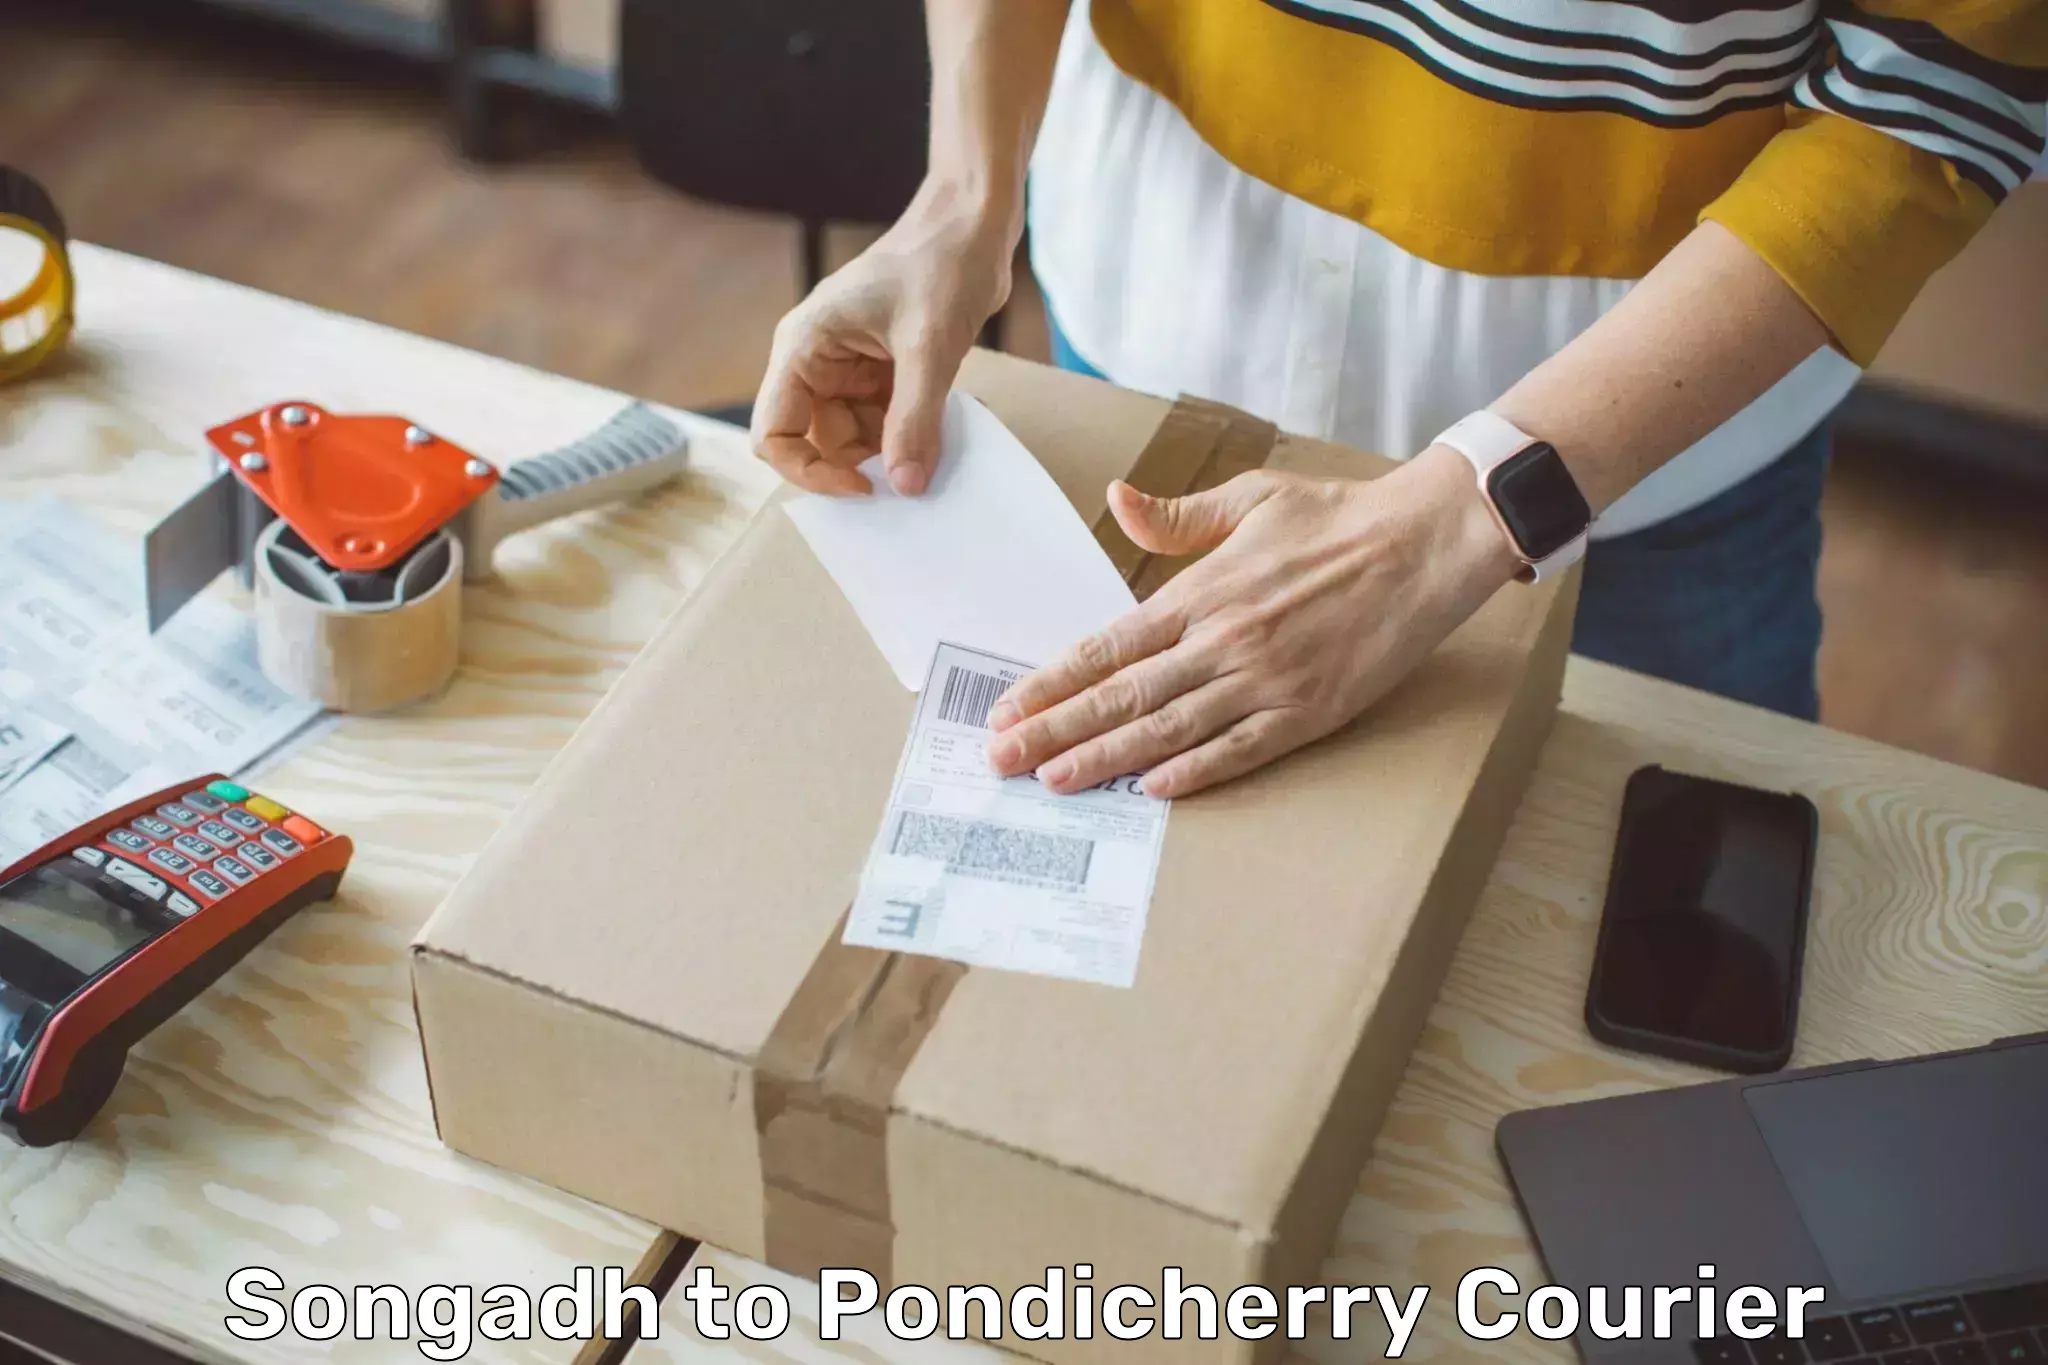 Efficient courier operations Songadh to Pondicherry